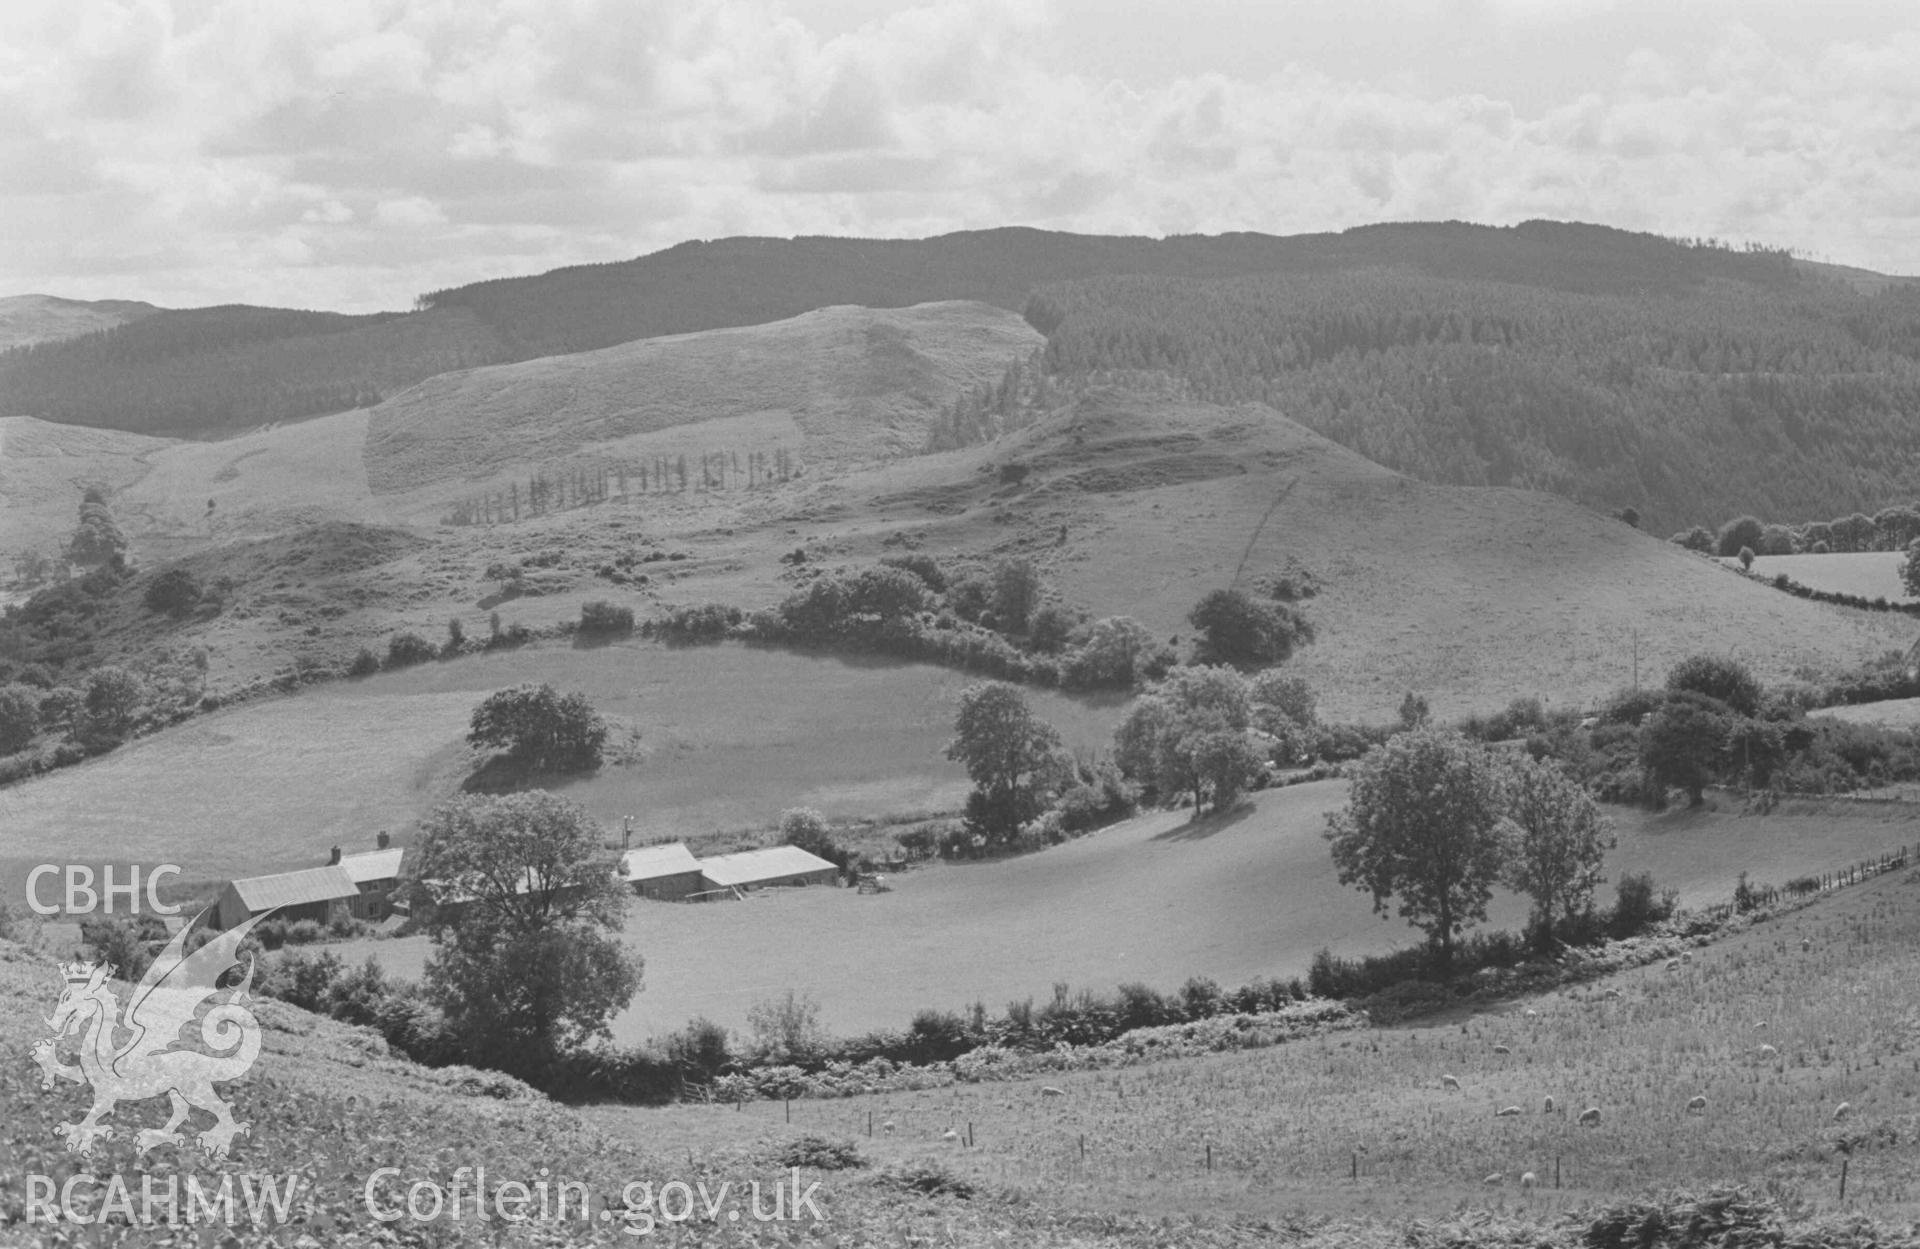 Digital copy of a black and white negative showing Pen-Grogwynion Farm and Castell Grogwynion iron age fort. Photographed by Arthur Chater on 17 August 1968. Looking south south west from Grid Reference SN 723 730.